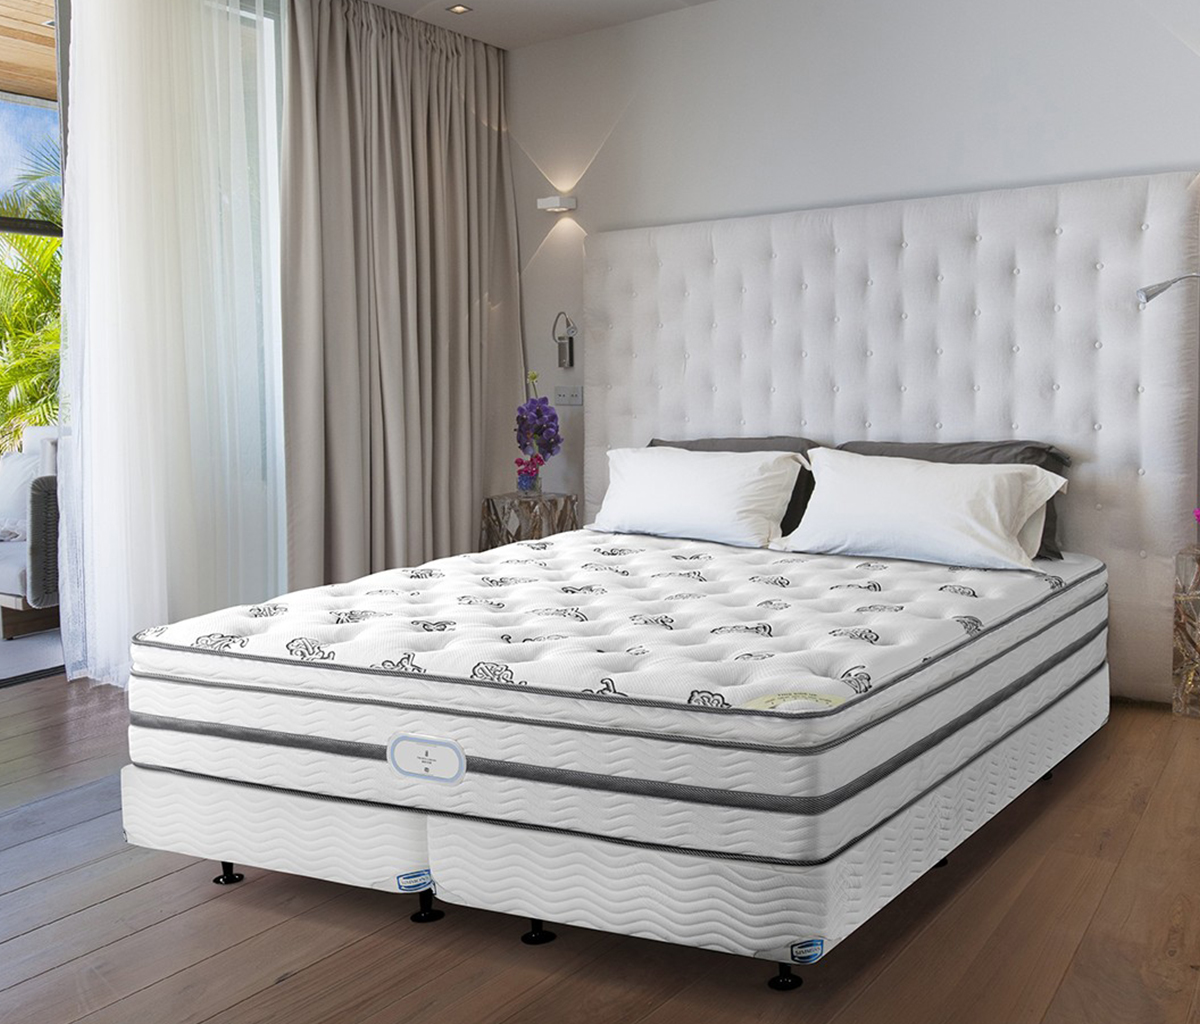 Ook dichters Overleven Mattress & Base | Box Springs by Simmons - The Ritz-Carlton Hotel Shops -  Ritz-Carlton Hotel Shop – Luxury Hotel Bedding, Linens, Scents and Home  Decor